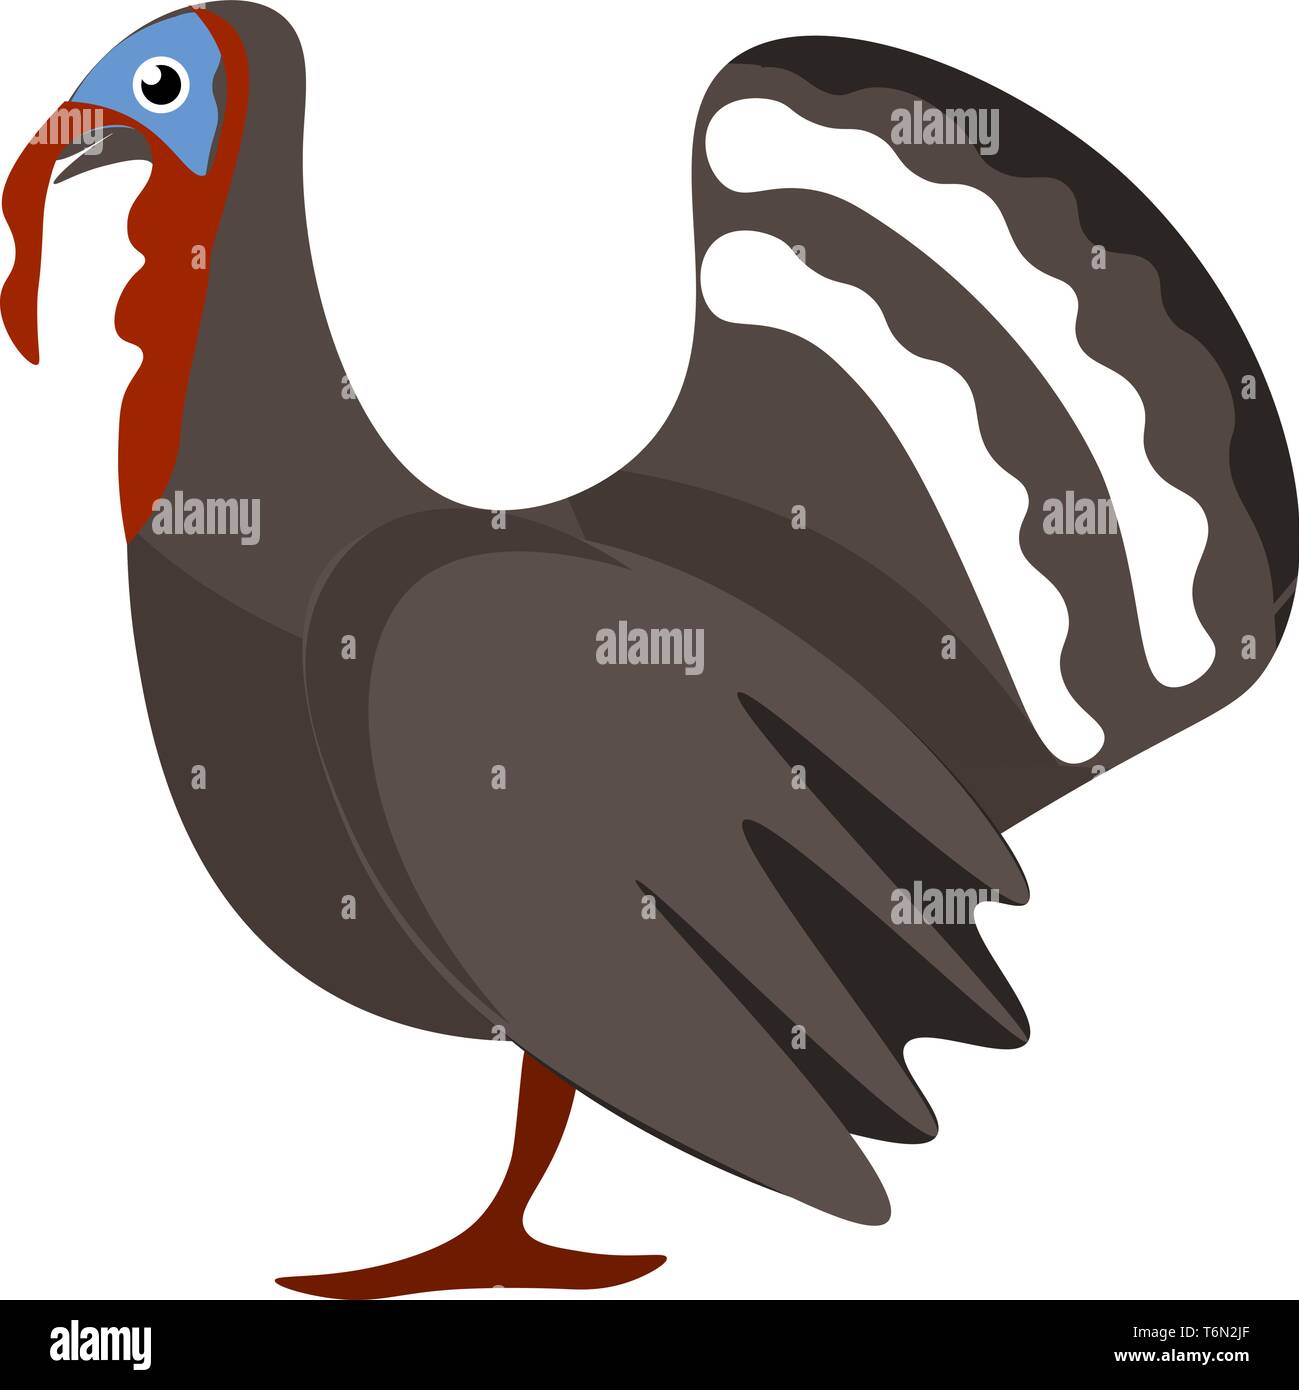 A Turkey bird with a blue bald head and a distinctive red fleshy wattle or protuberance that hangs from the top of the beak  vector  color drawing or  Stock Vector